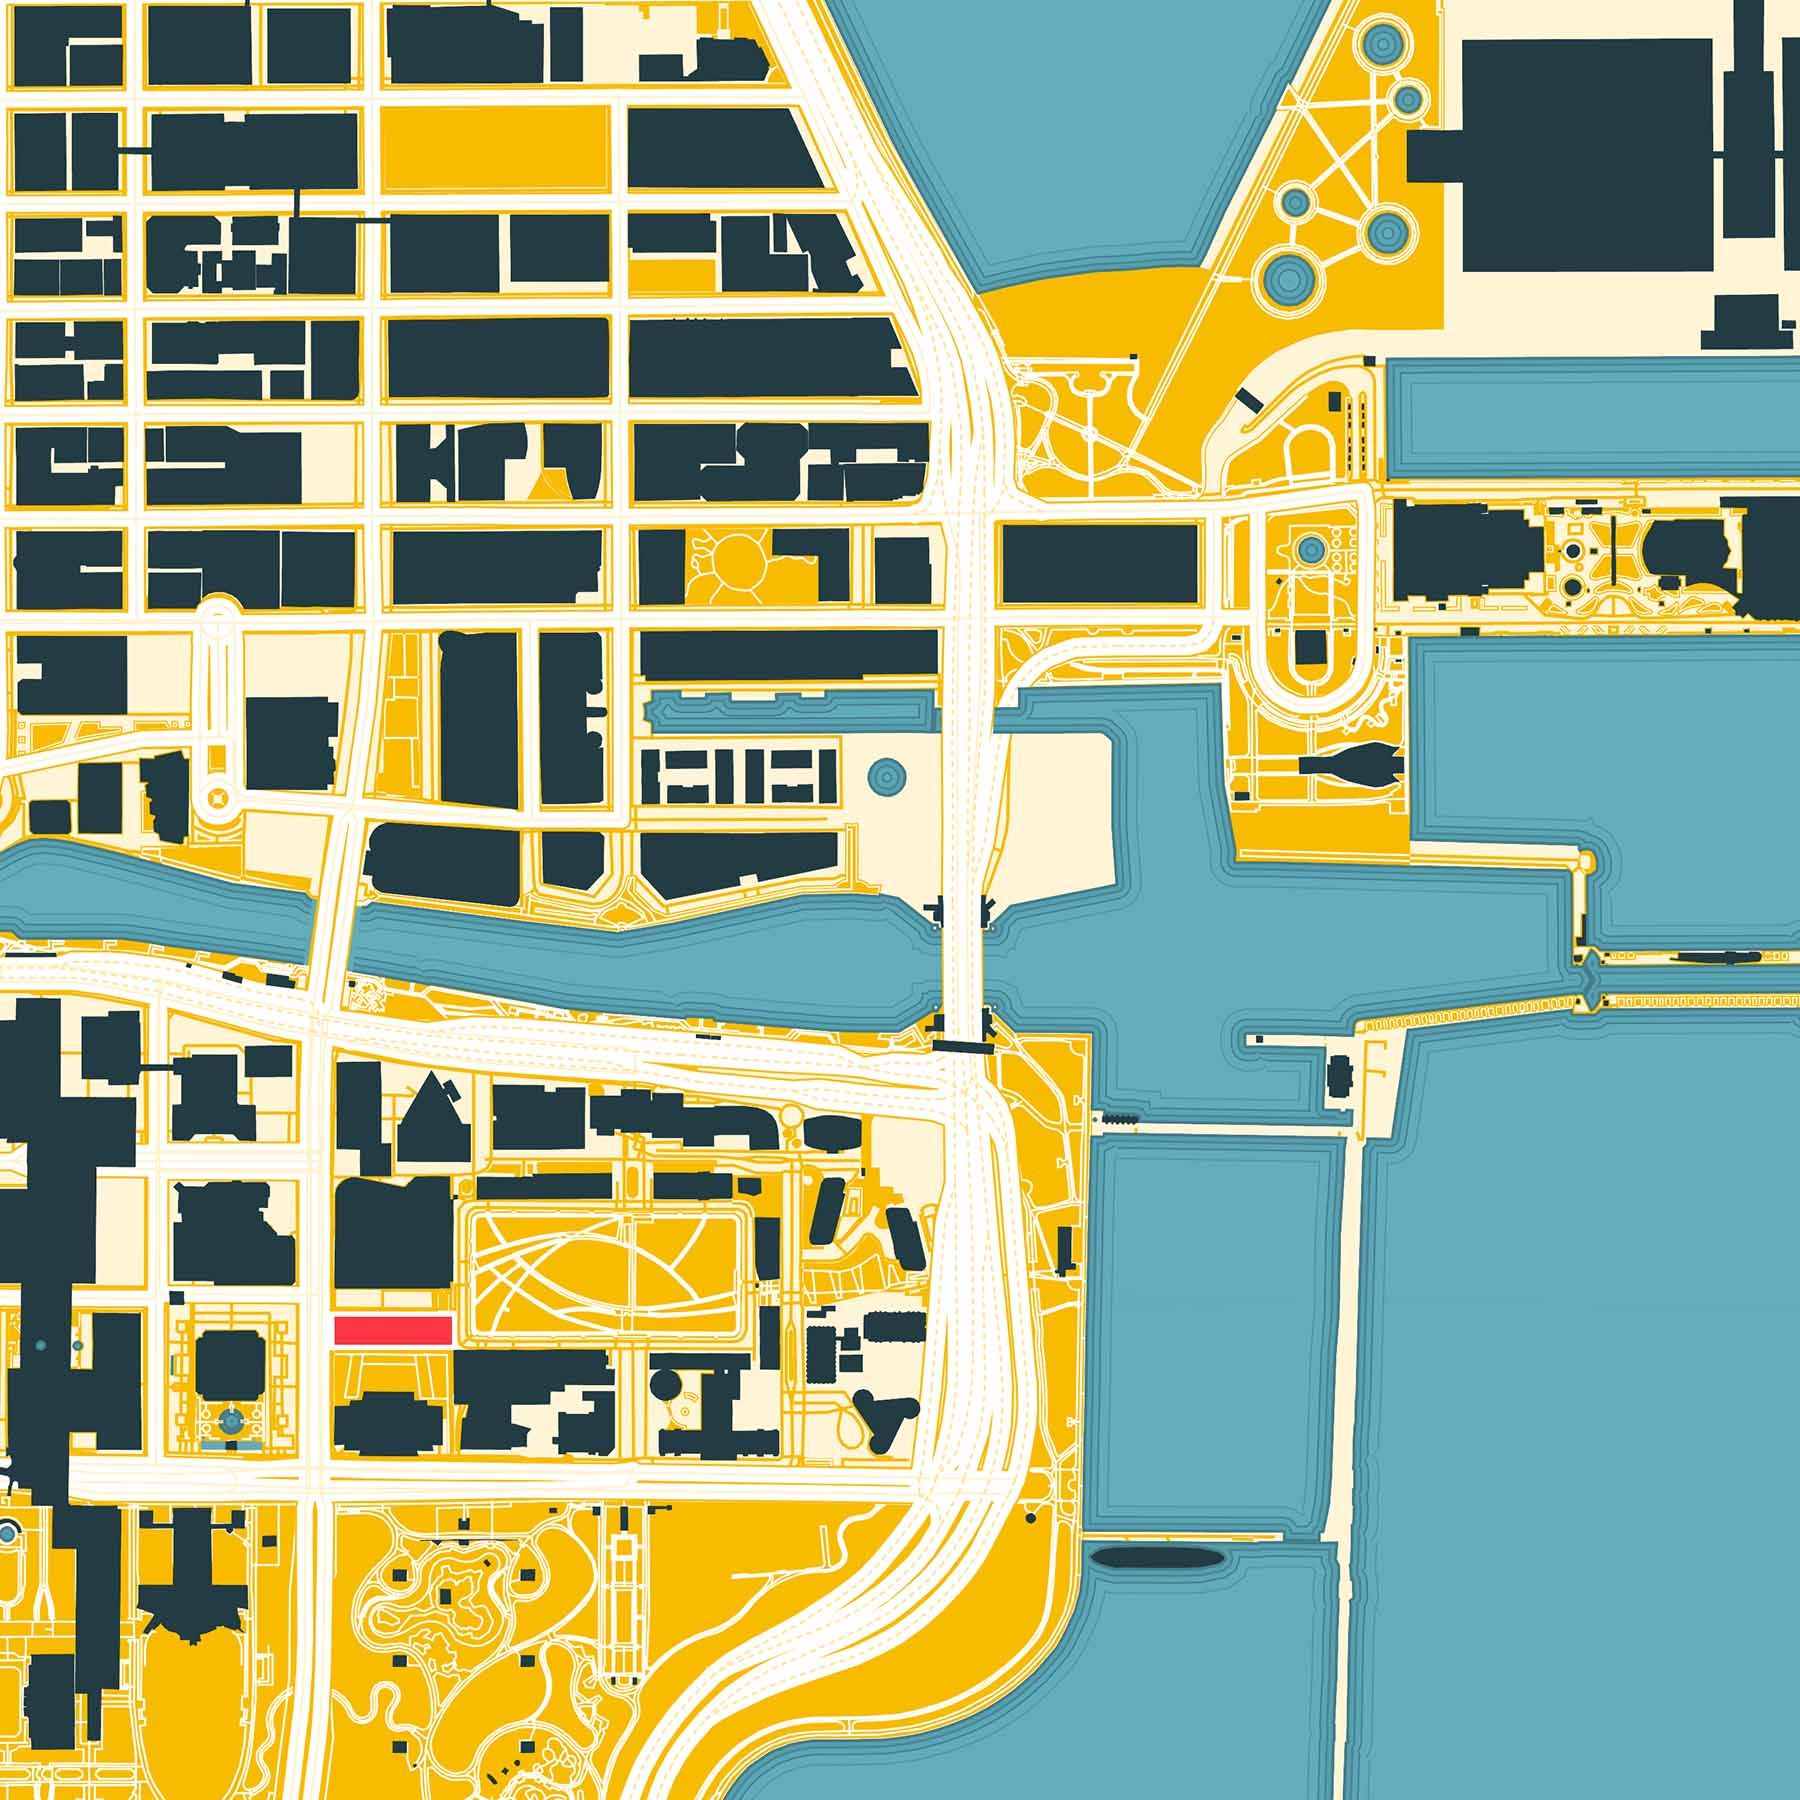 A top down map of the mouth of the Chicago river and the surrounding streets and buildings